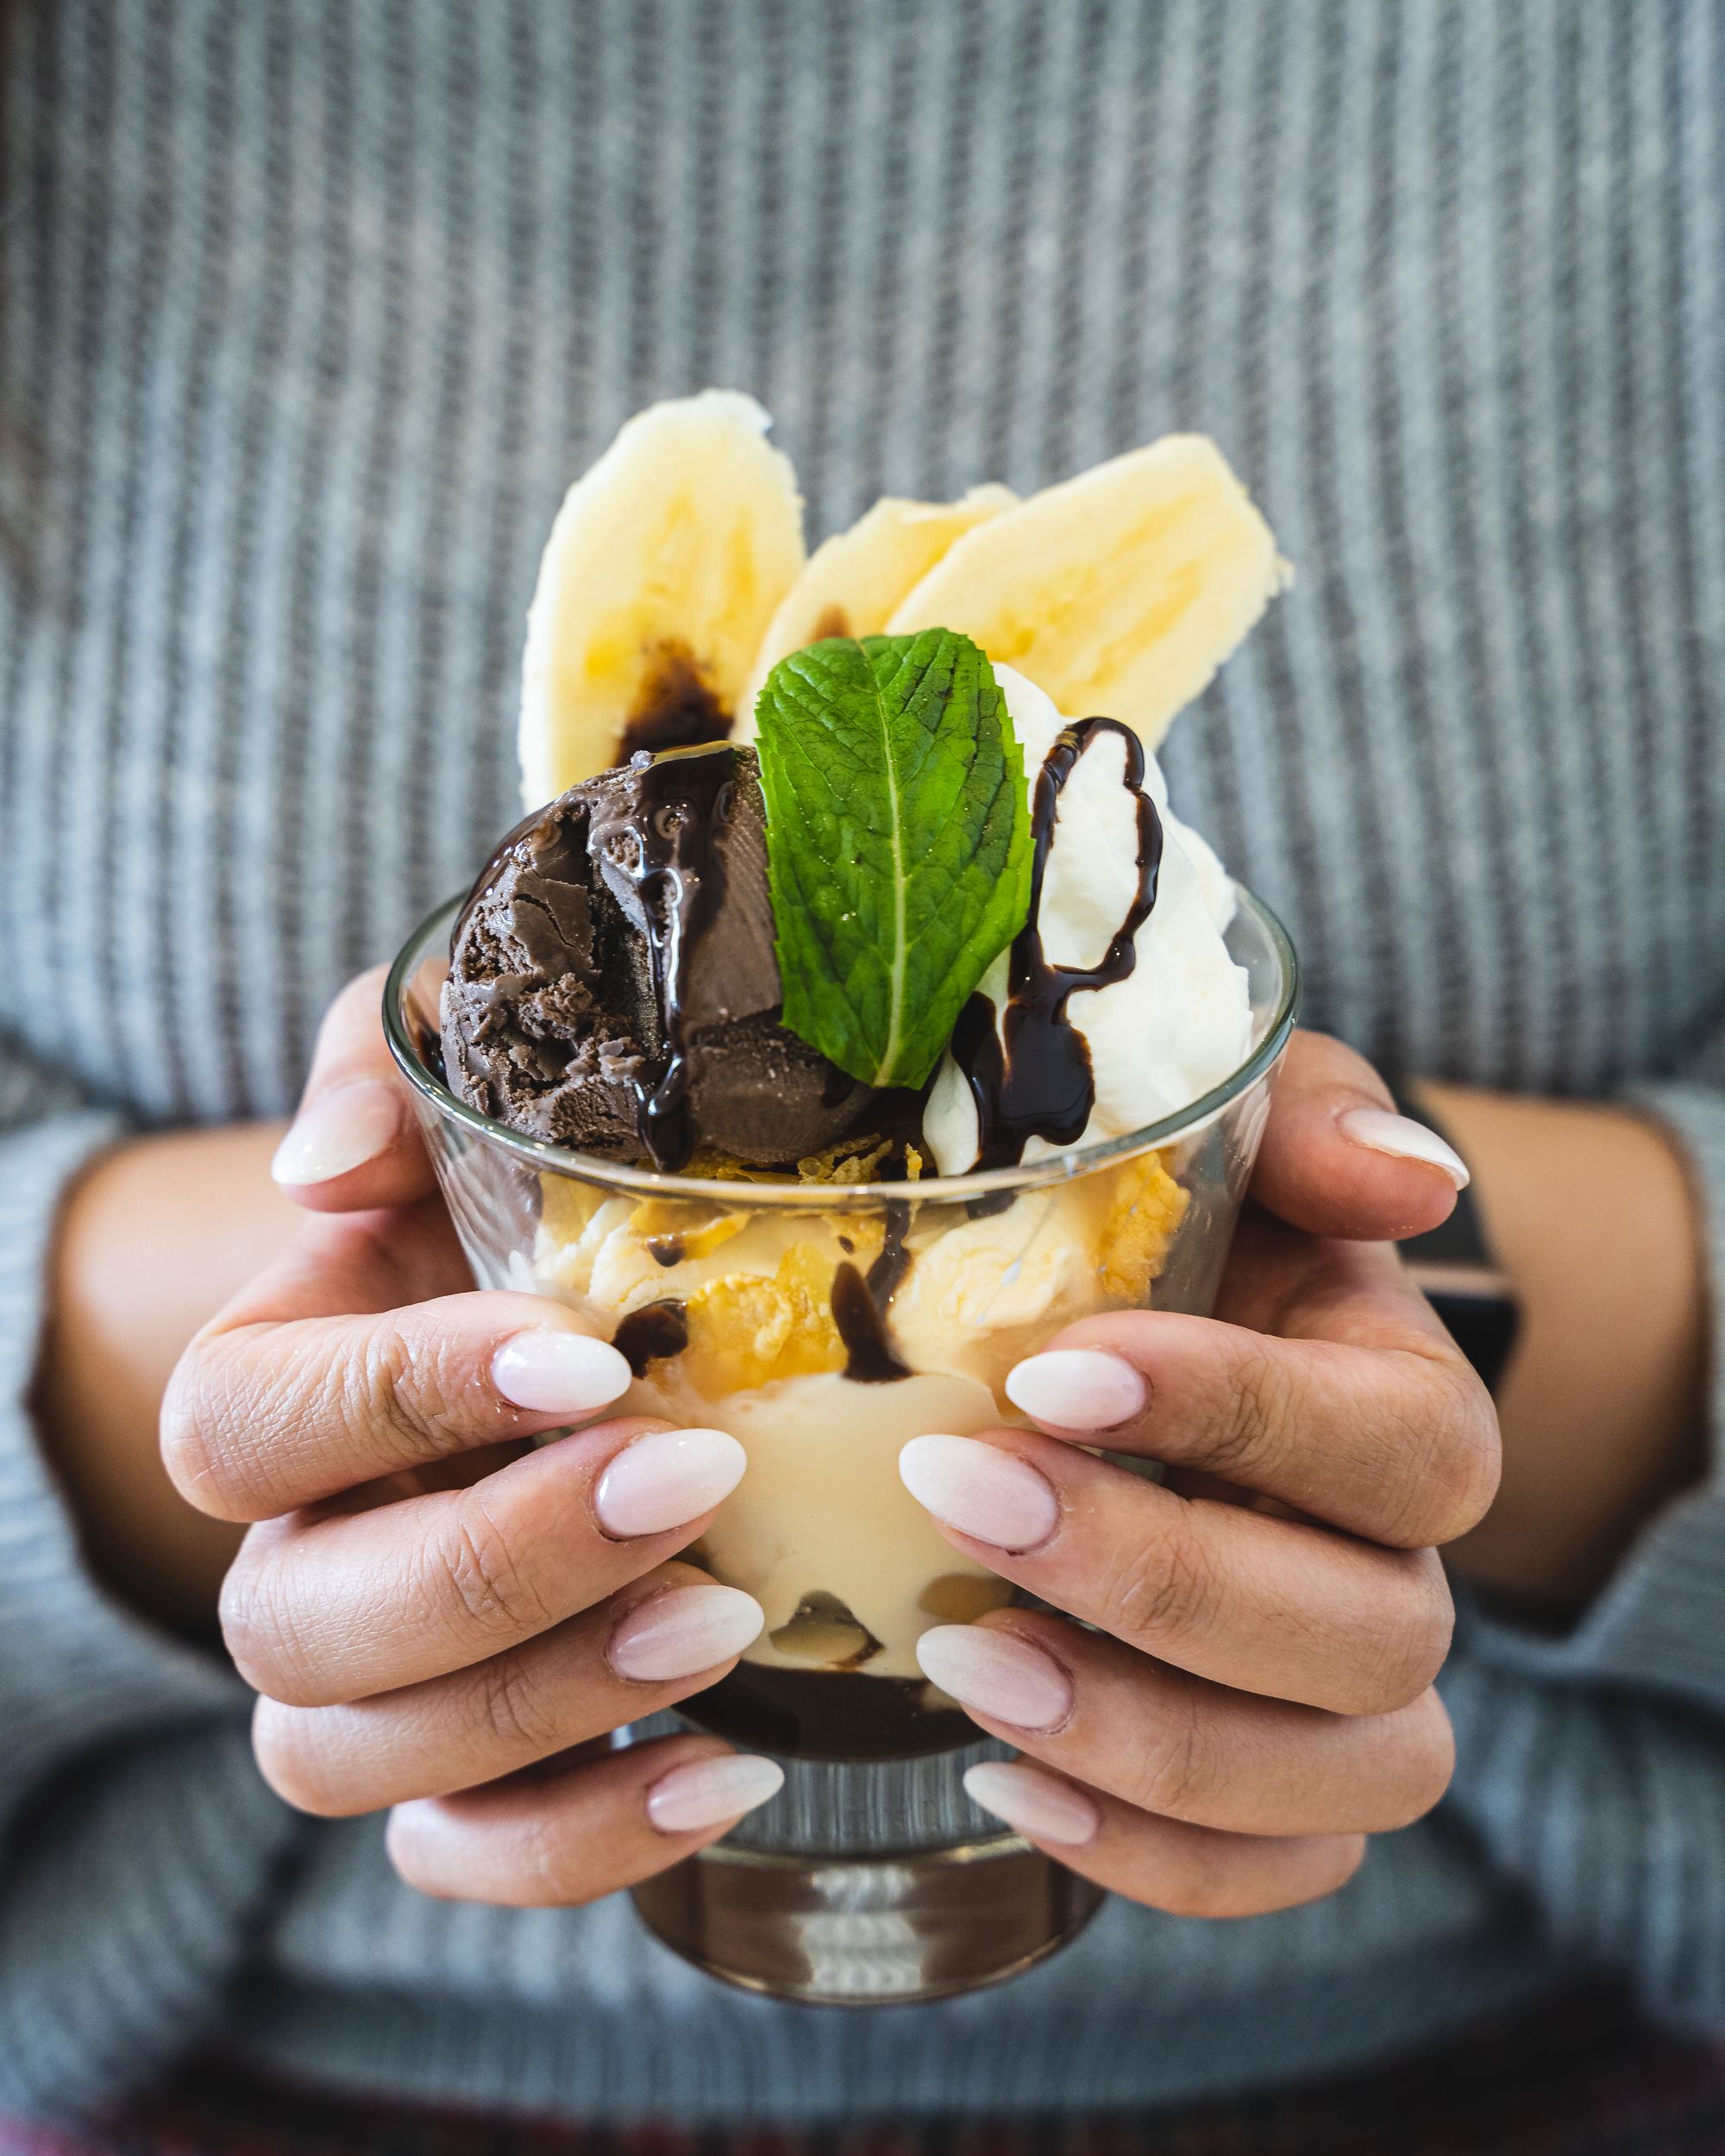 Pedicured hands holding a glace with a chocolate banana parfait inside